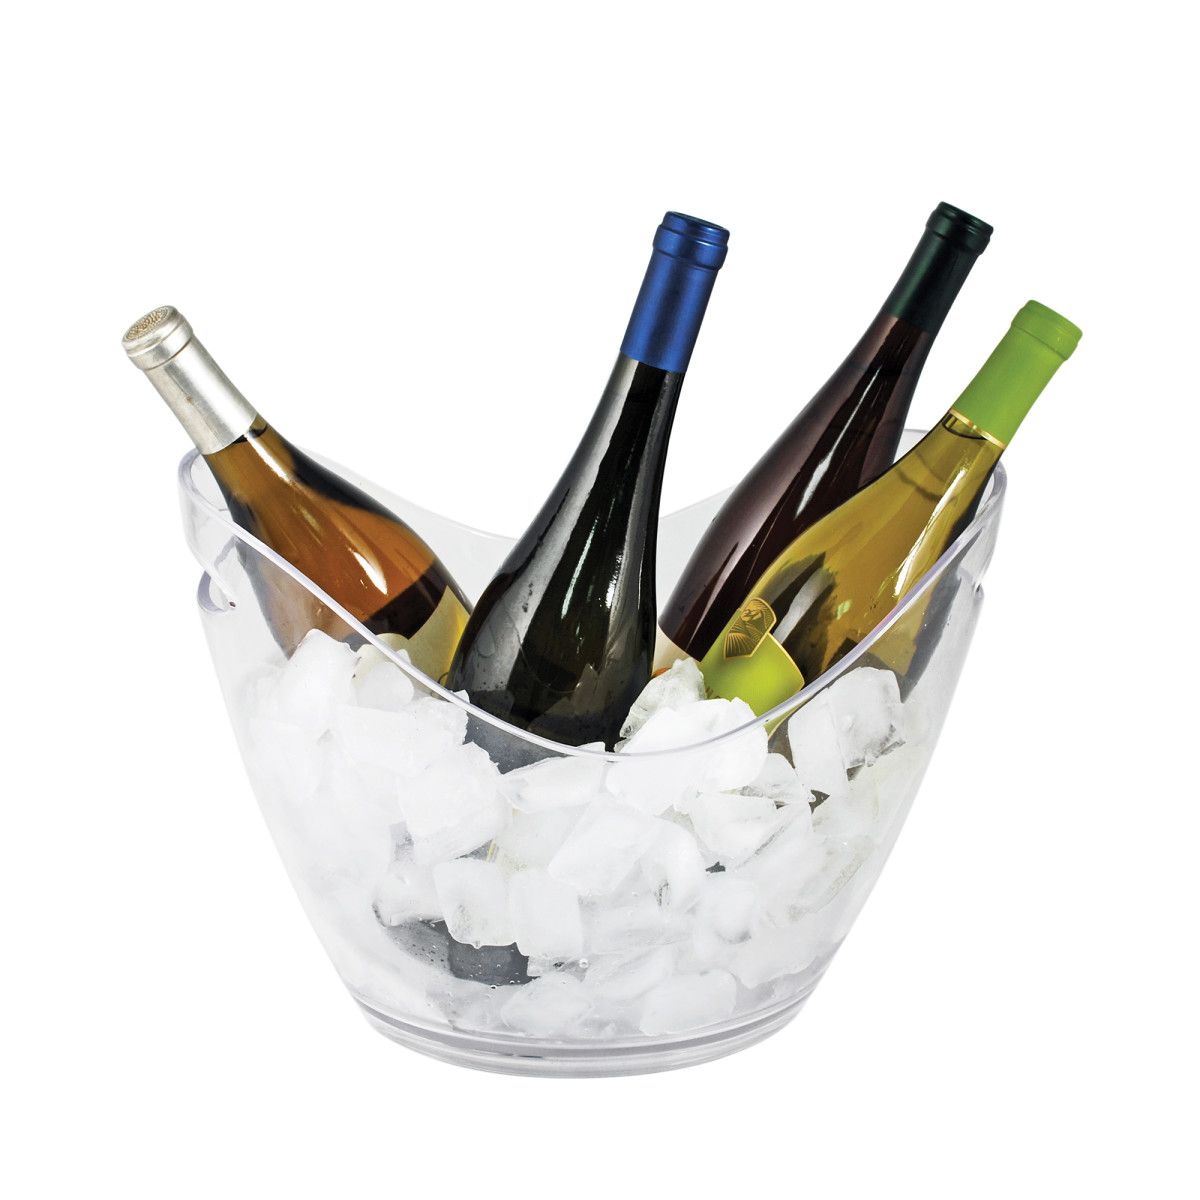 True Ice Bucket Holder Chilling Tub for Indoor and Outdoor Use